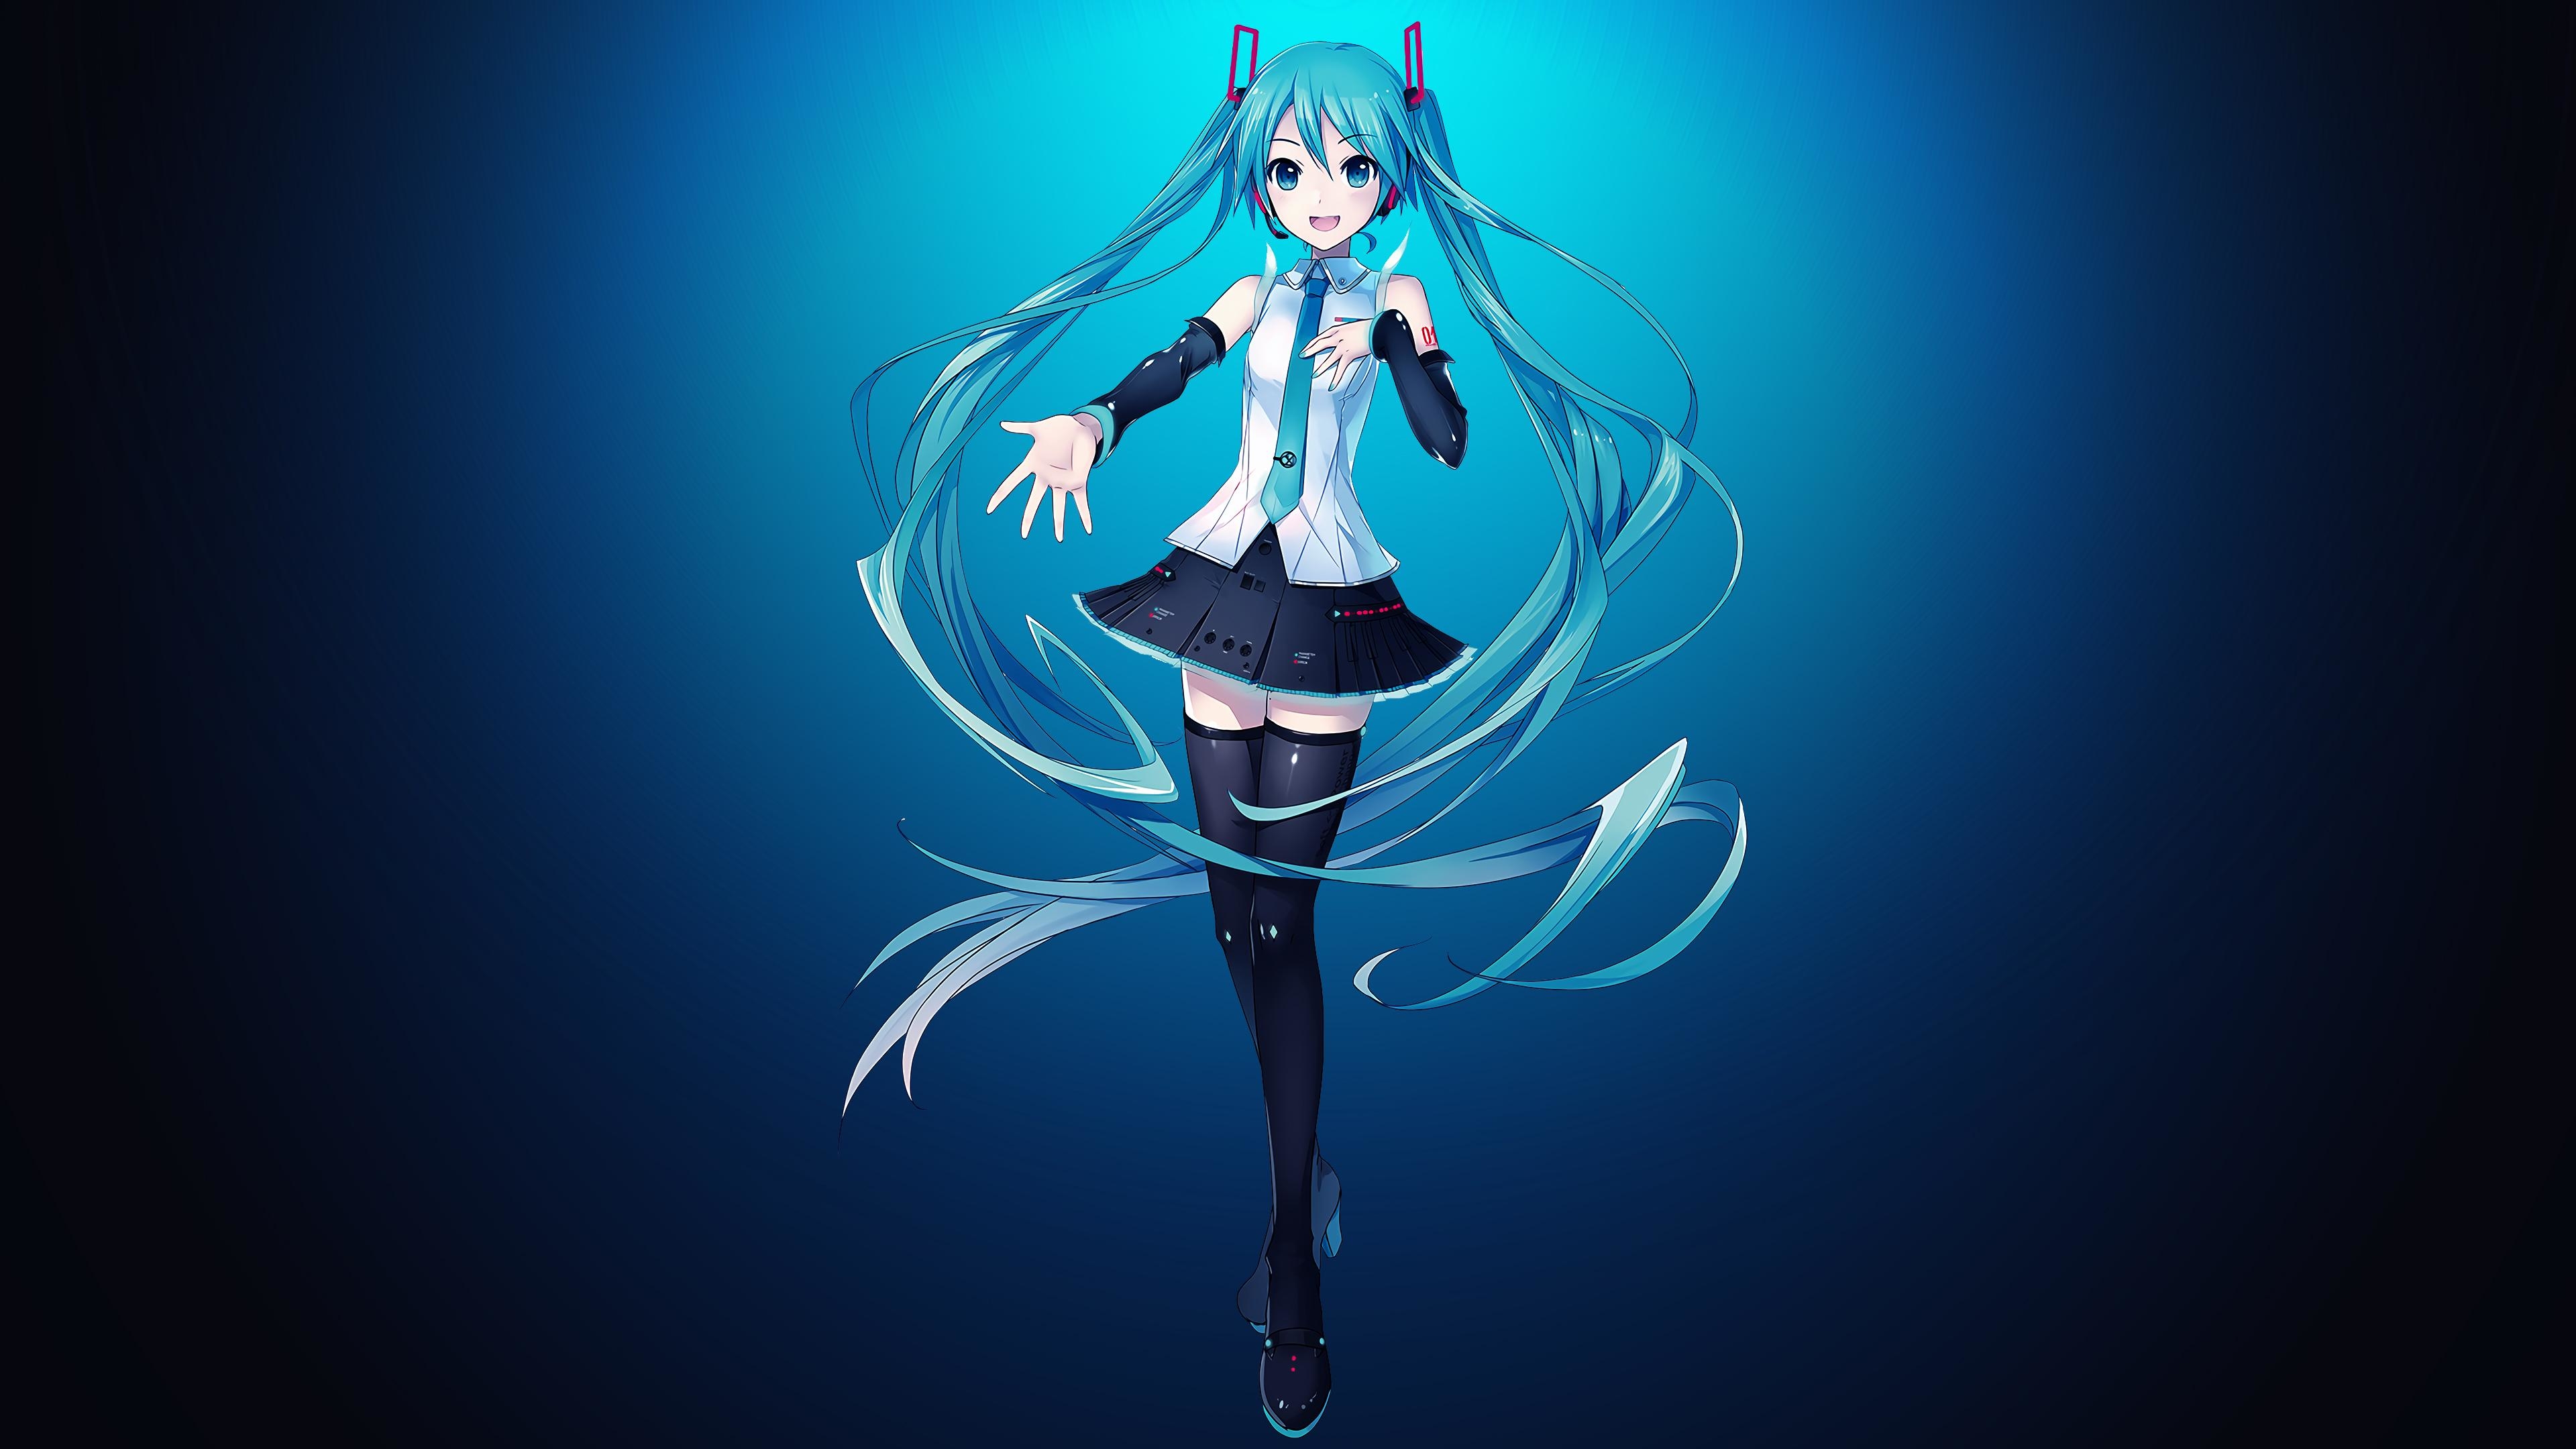 Hatsune Miku 4K Wallpaper, Hd Anime 4K Wallpapers, Images And